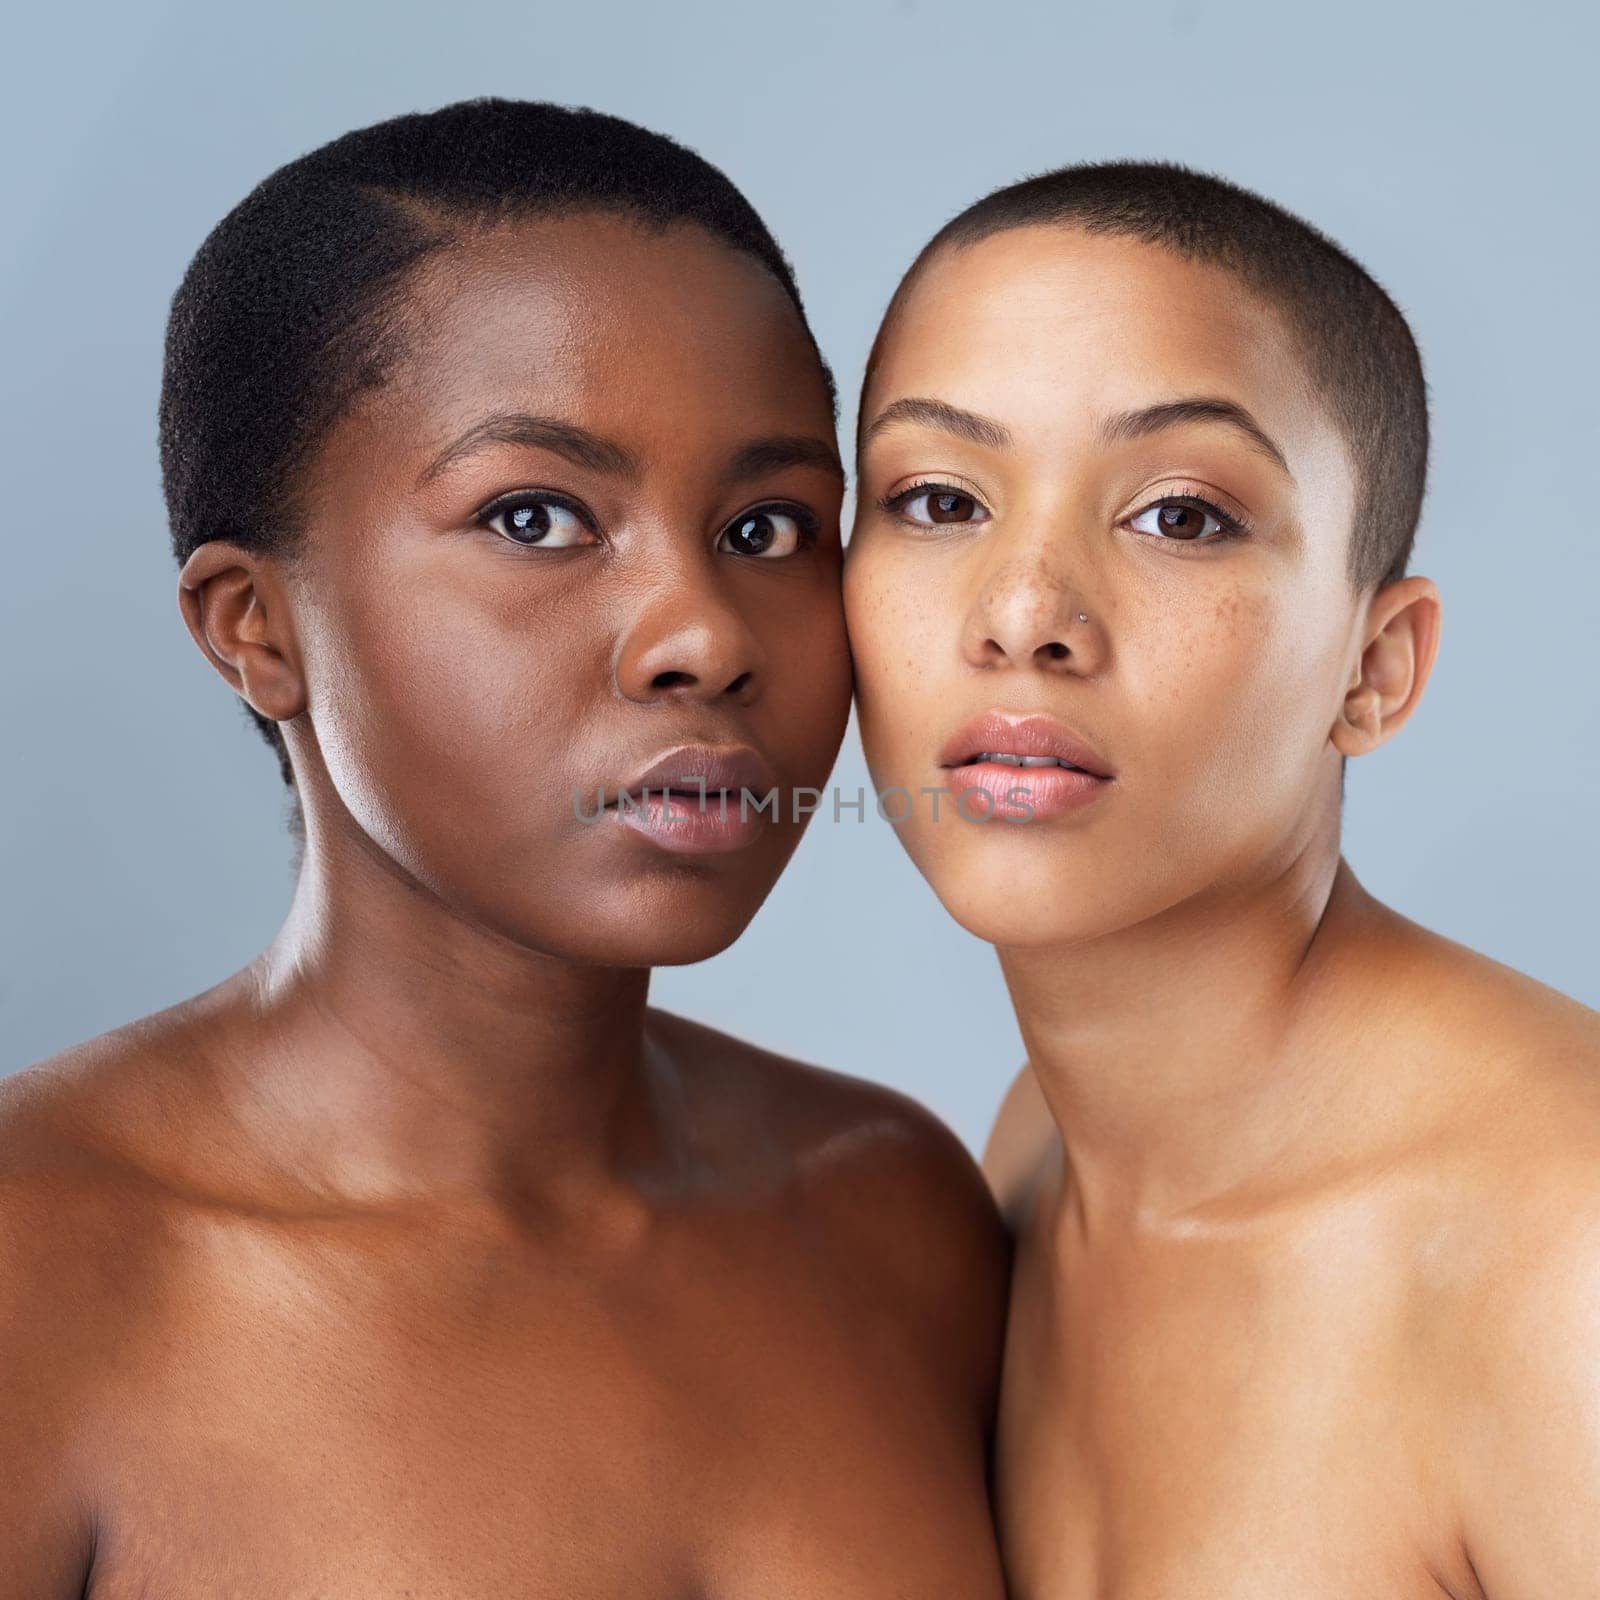 We can be serious too. Portrait of two beautiful young women standing close to each other against a grey background